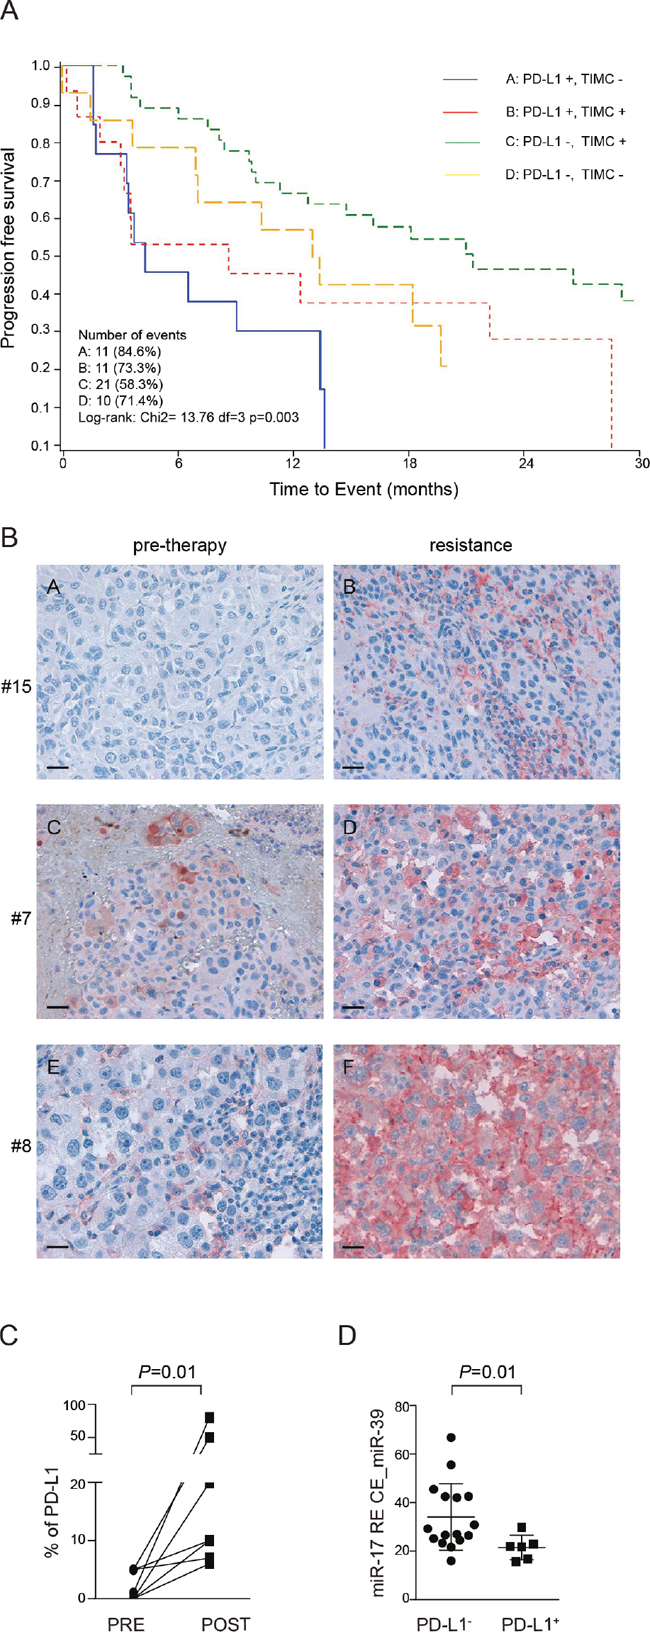 PD-L1 immunohistochemical expression in paired tissue biopsies taken before and after onset of resistance in patients treated with BRAF inhibitors (dabrafenib or vemurafenib).